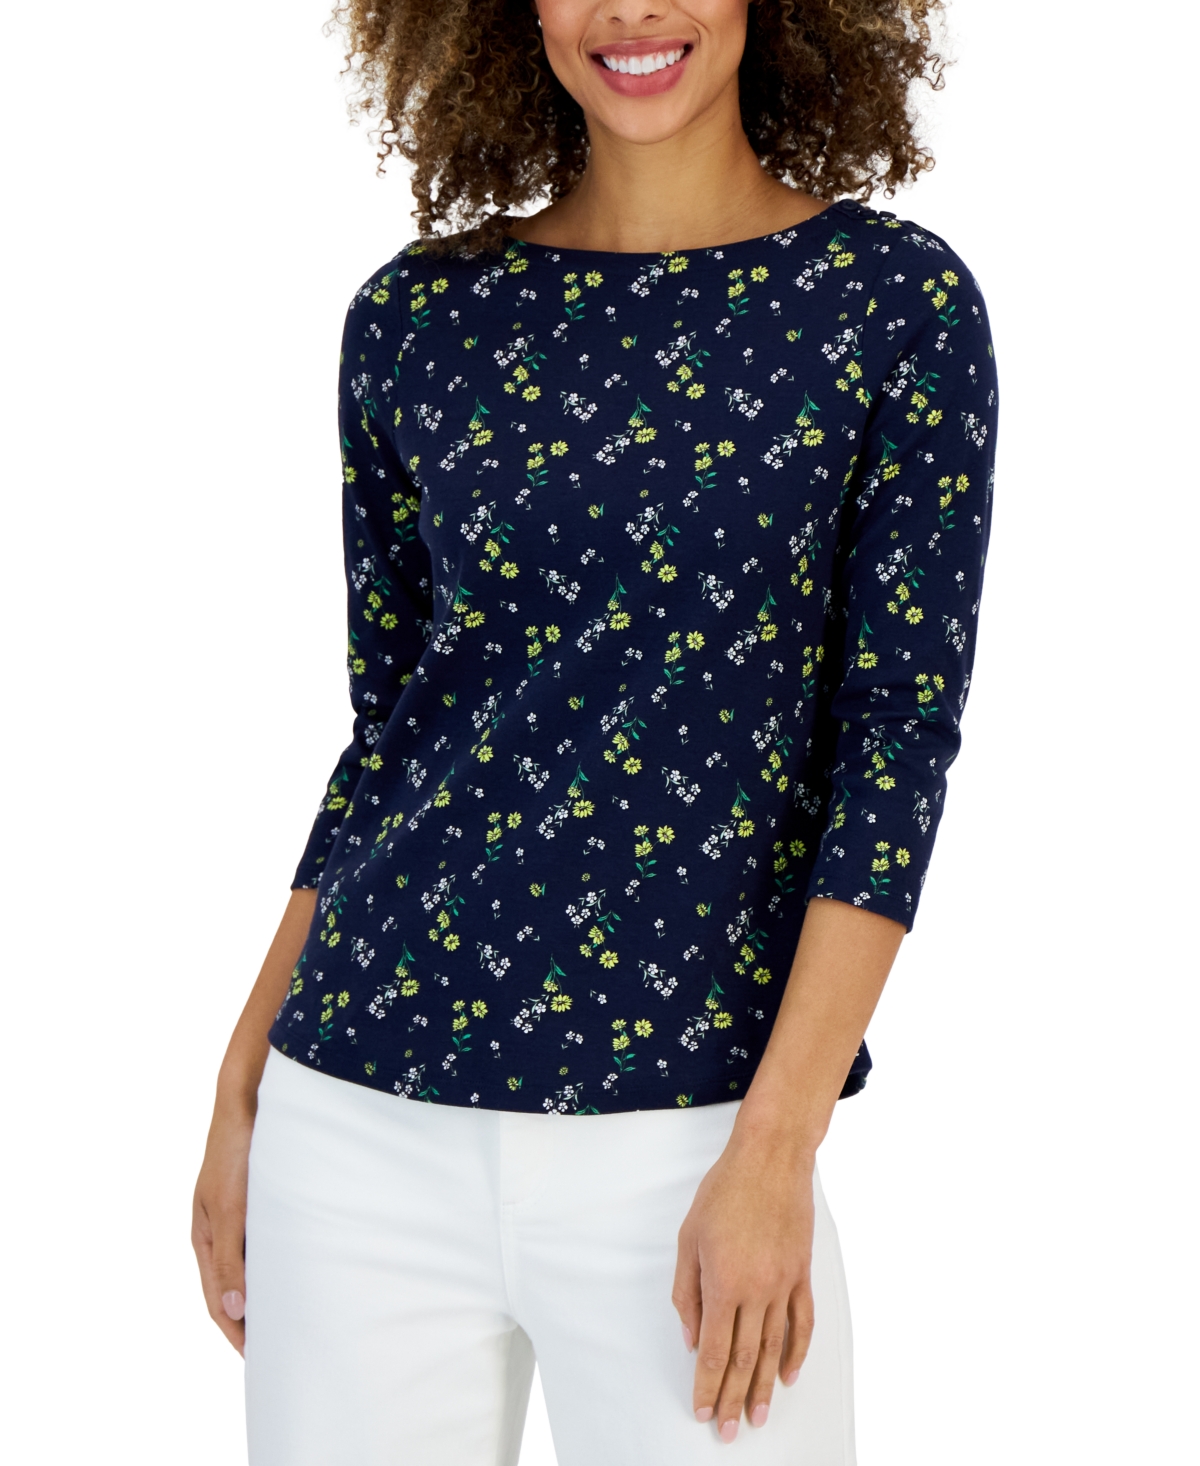 Charter Created Closet Women\'s Top, Macy\'s Smart | Boat-Neck for 3/4-Sleeve Club Floral